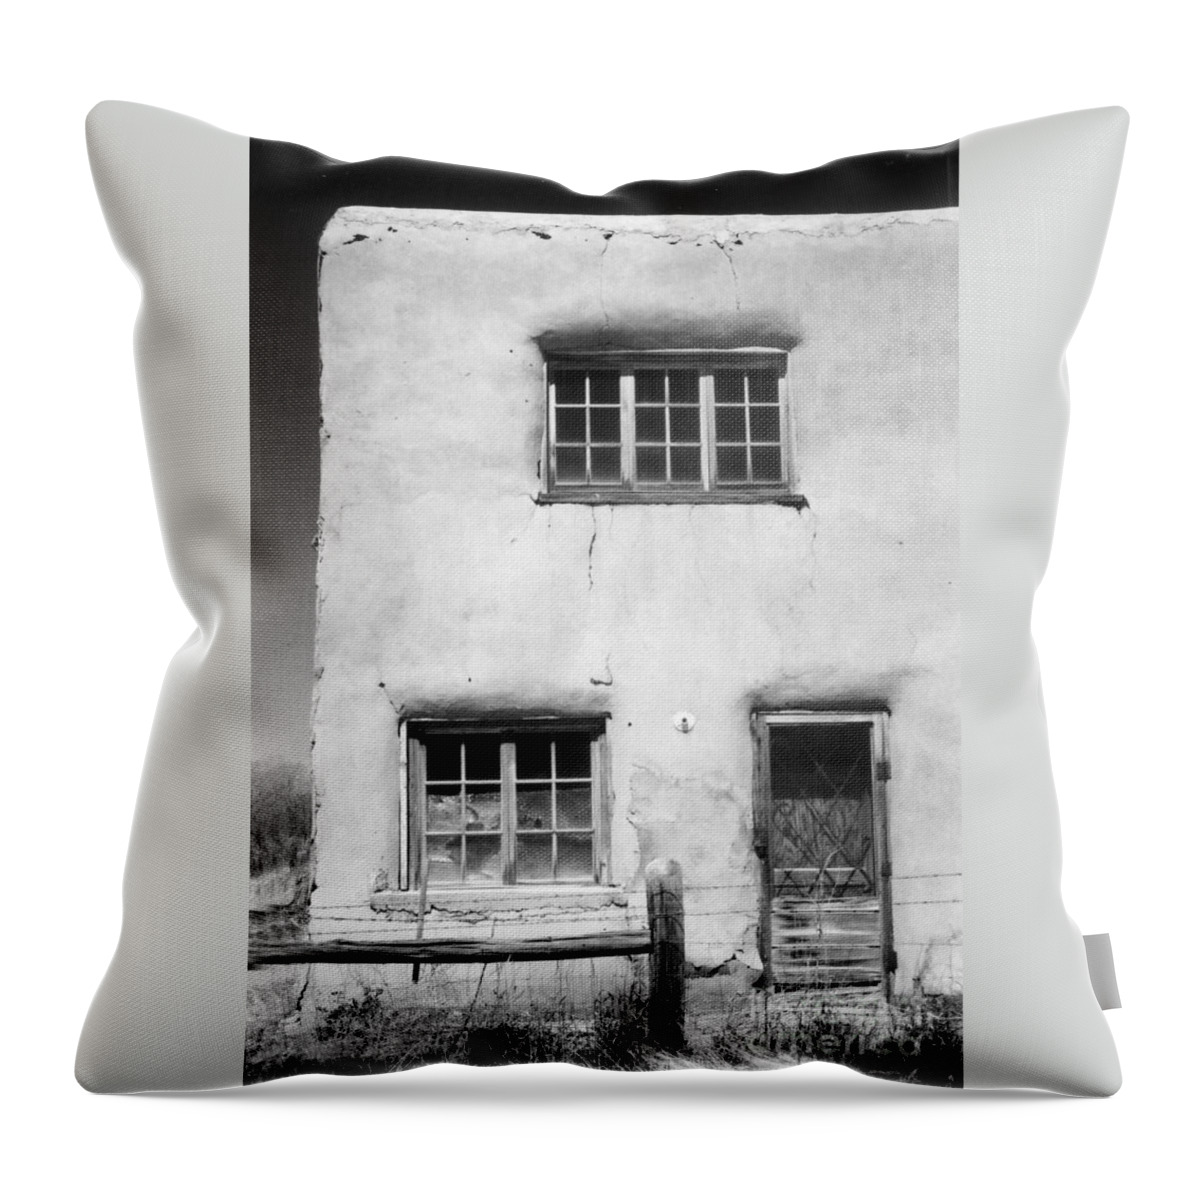 Building Throw Pillow featuring the photograph Deserted by Crystal Nederman